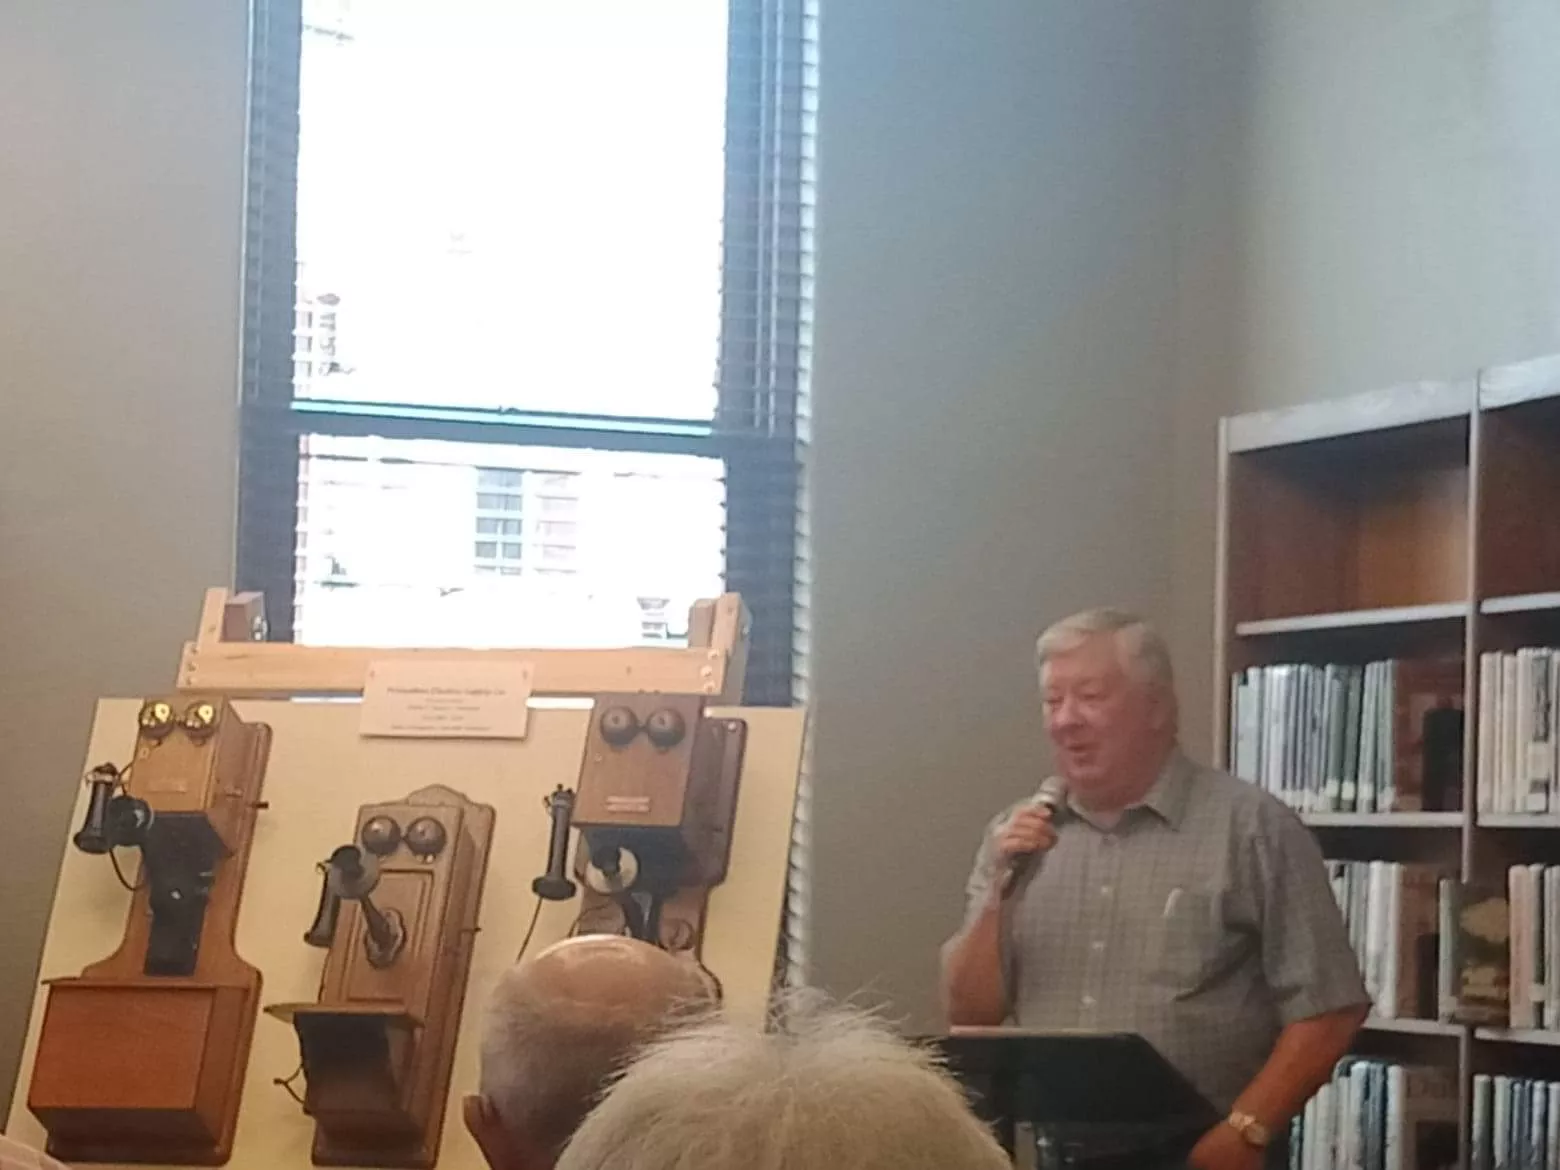 man speaks about old telephones on display next to him